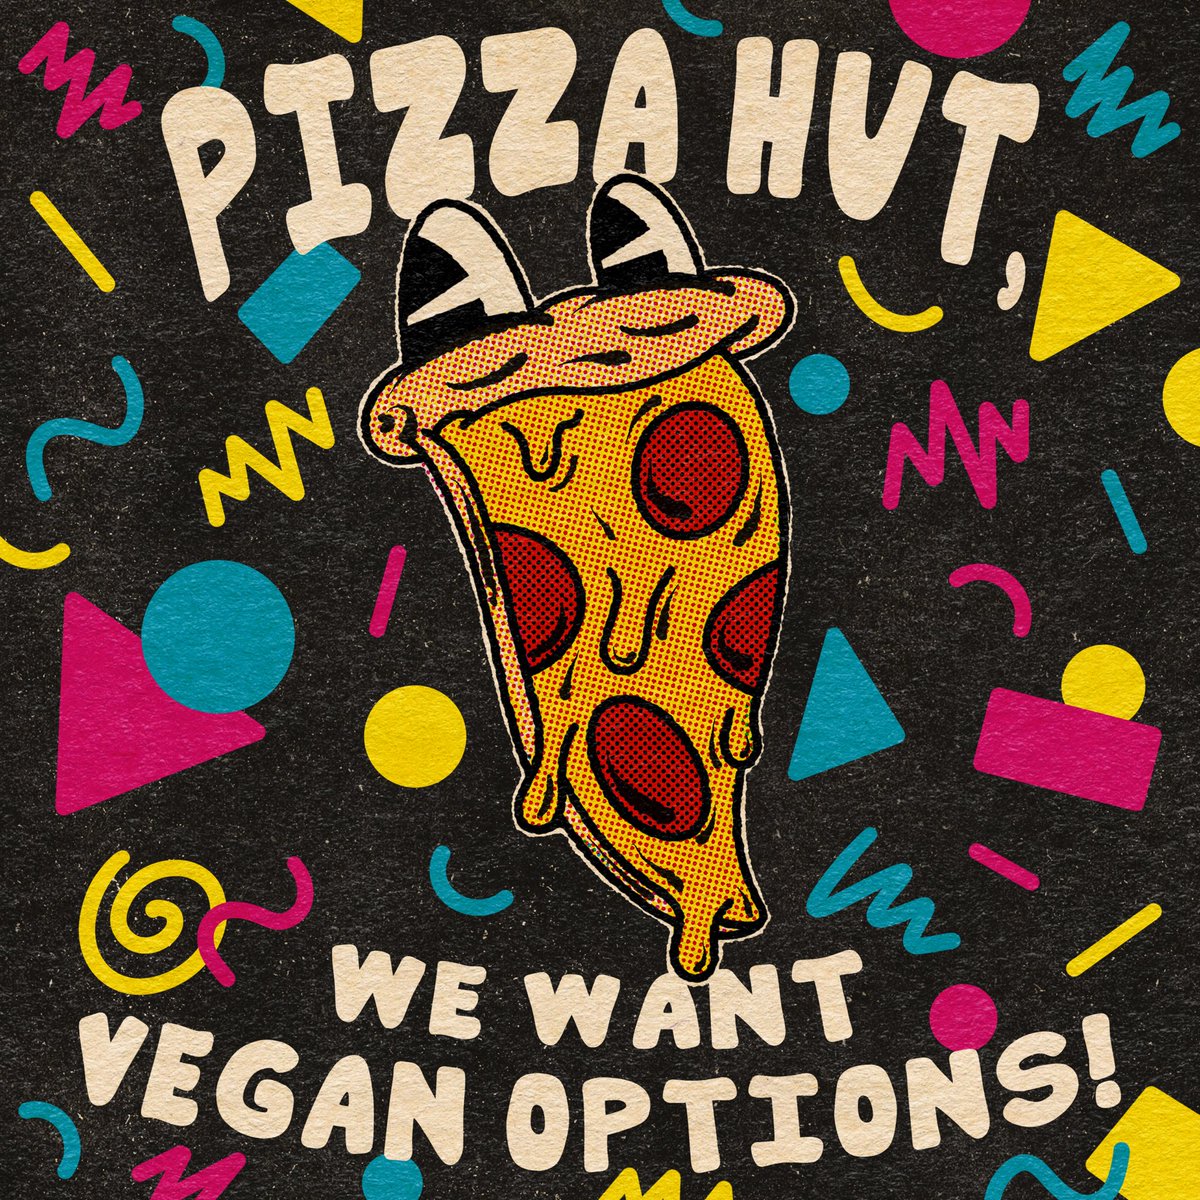 Hey @pizzahut it’s 2023! Get #vegan cheese and meats already!